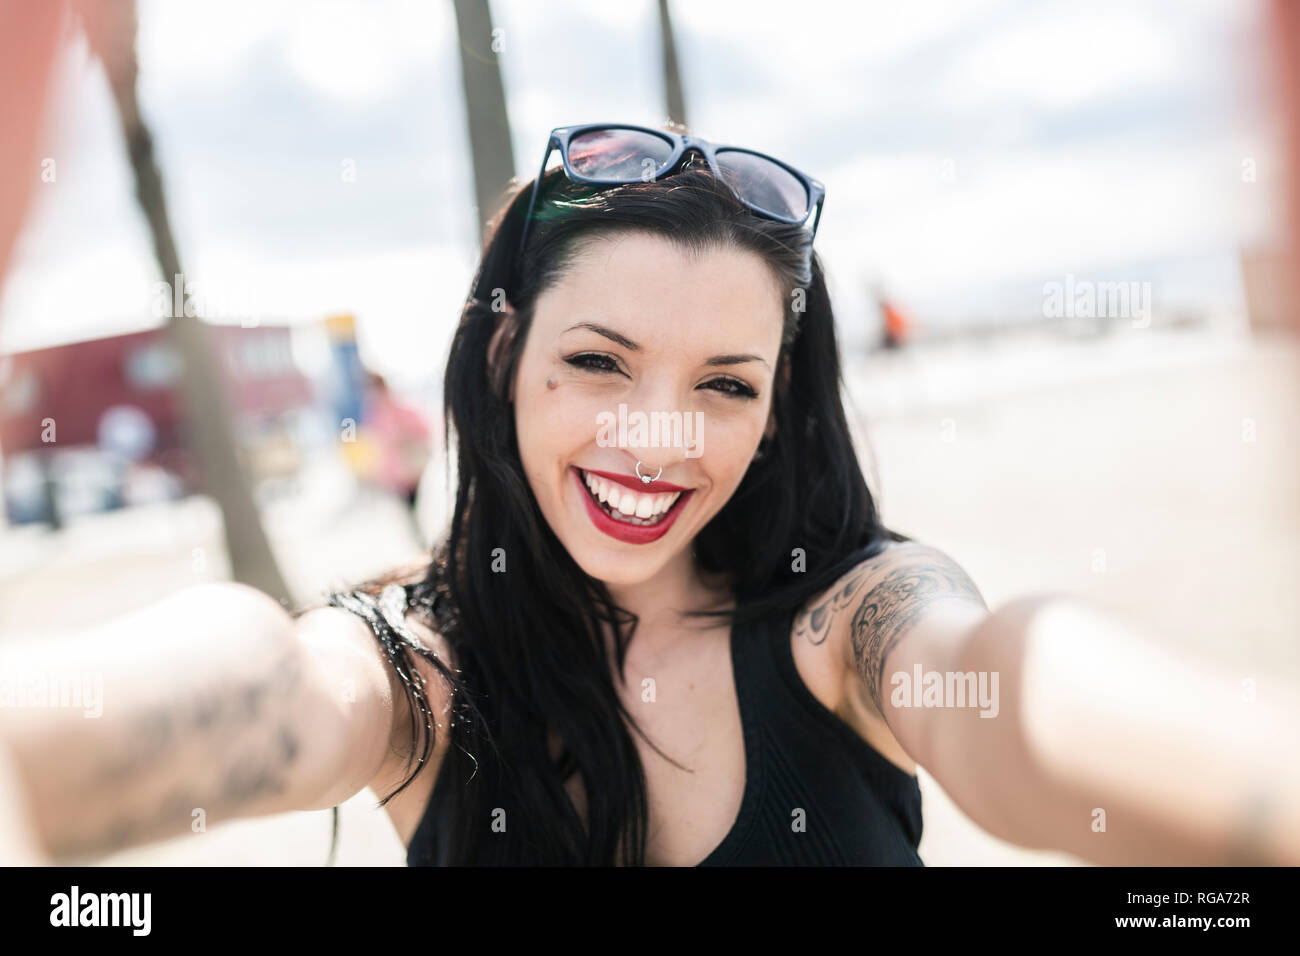 Portrait of happy young woman with nose piercing and tattoos Stock Photo